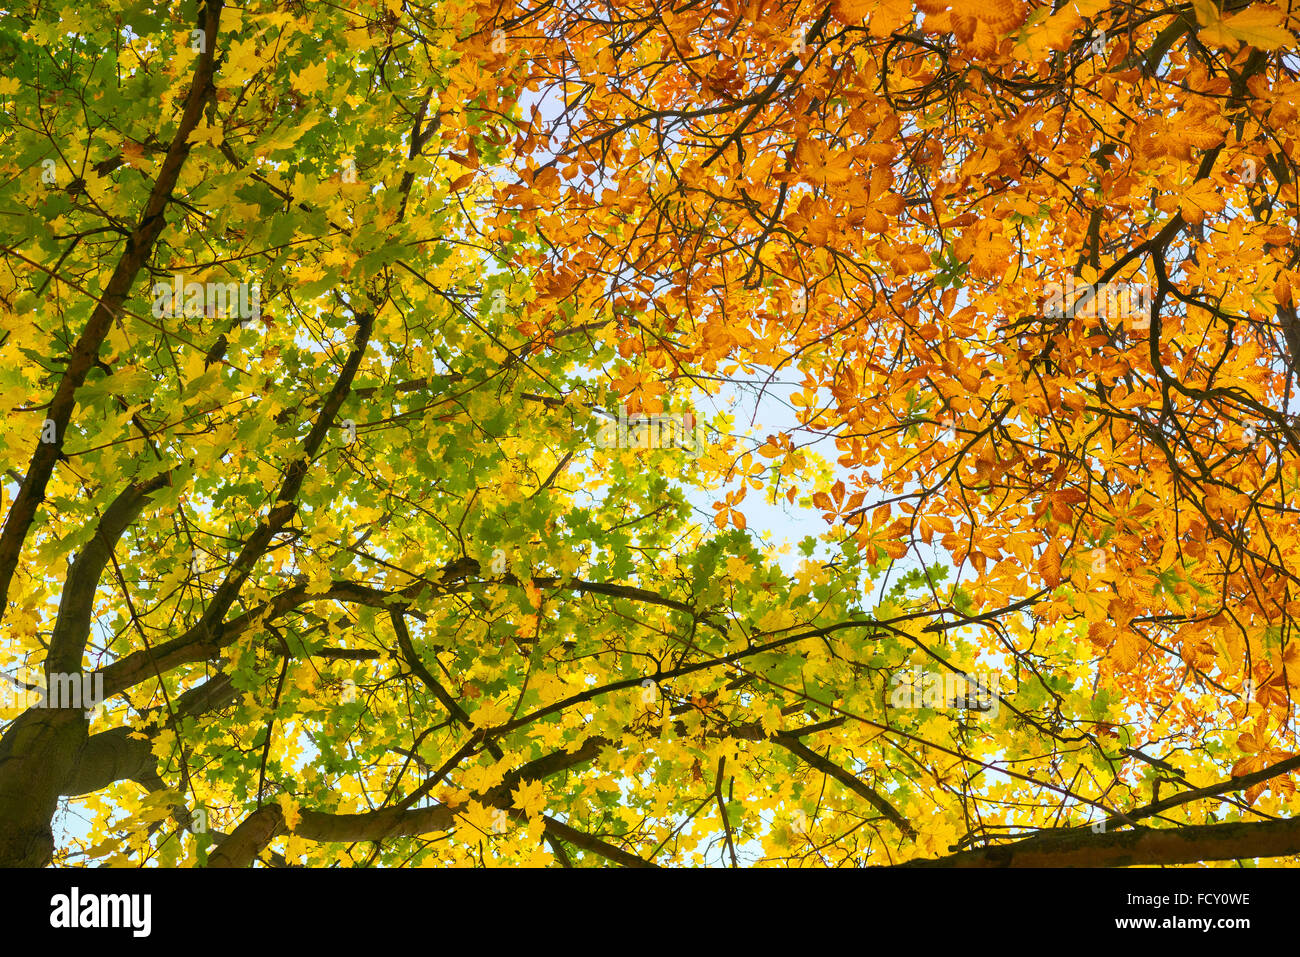 Hanging branches of golden autumn leaves contrasted against the blue sky, horse chestnut and Norway Maple Stock Photo